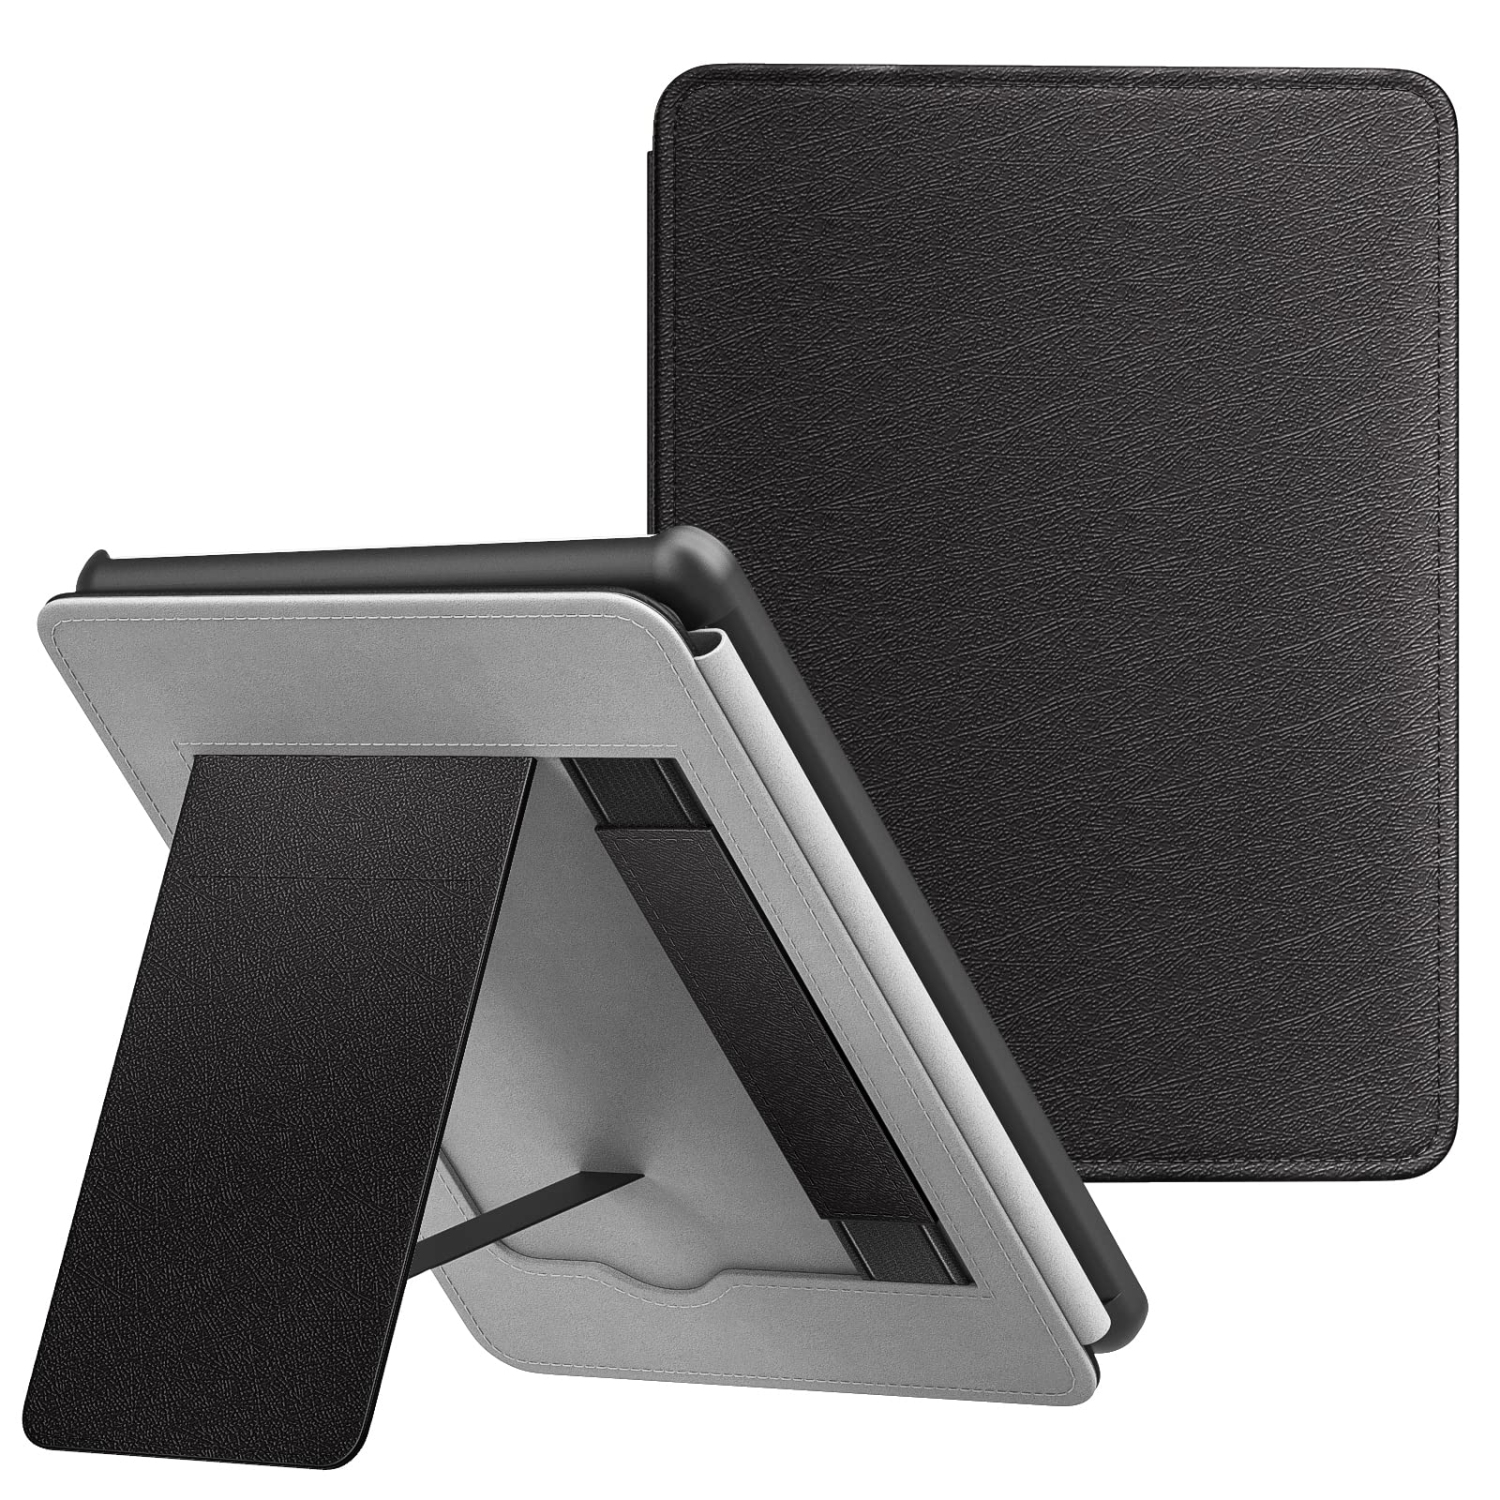 MoKo Case for 6.8" Kindle Paperwhite (11th Generation-2021) and Kindle Paperwhite Signature Edition, Lightweight PU Leather